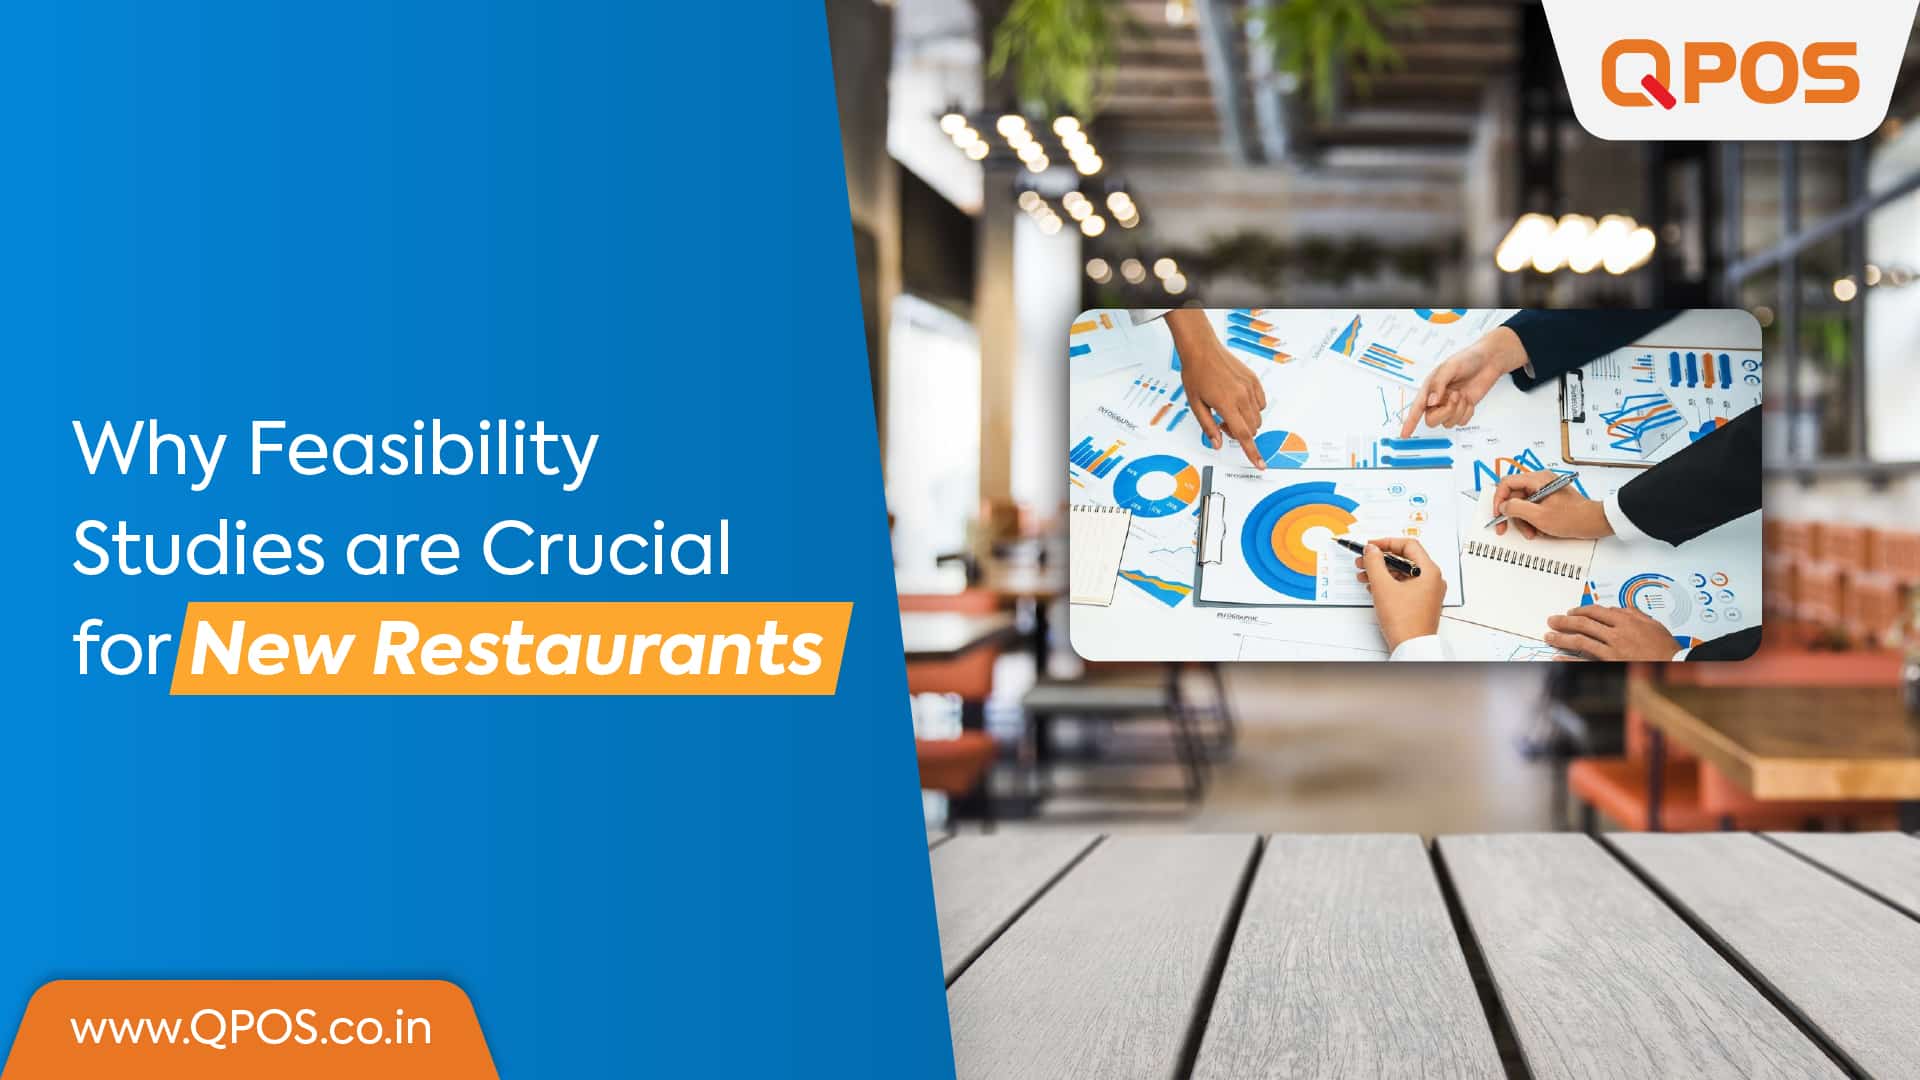 Why Feasibility Studies are Crucial for New Restaurants